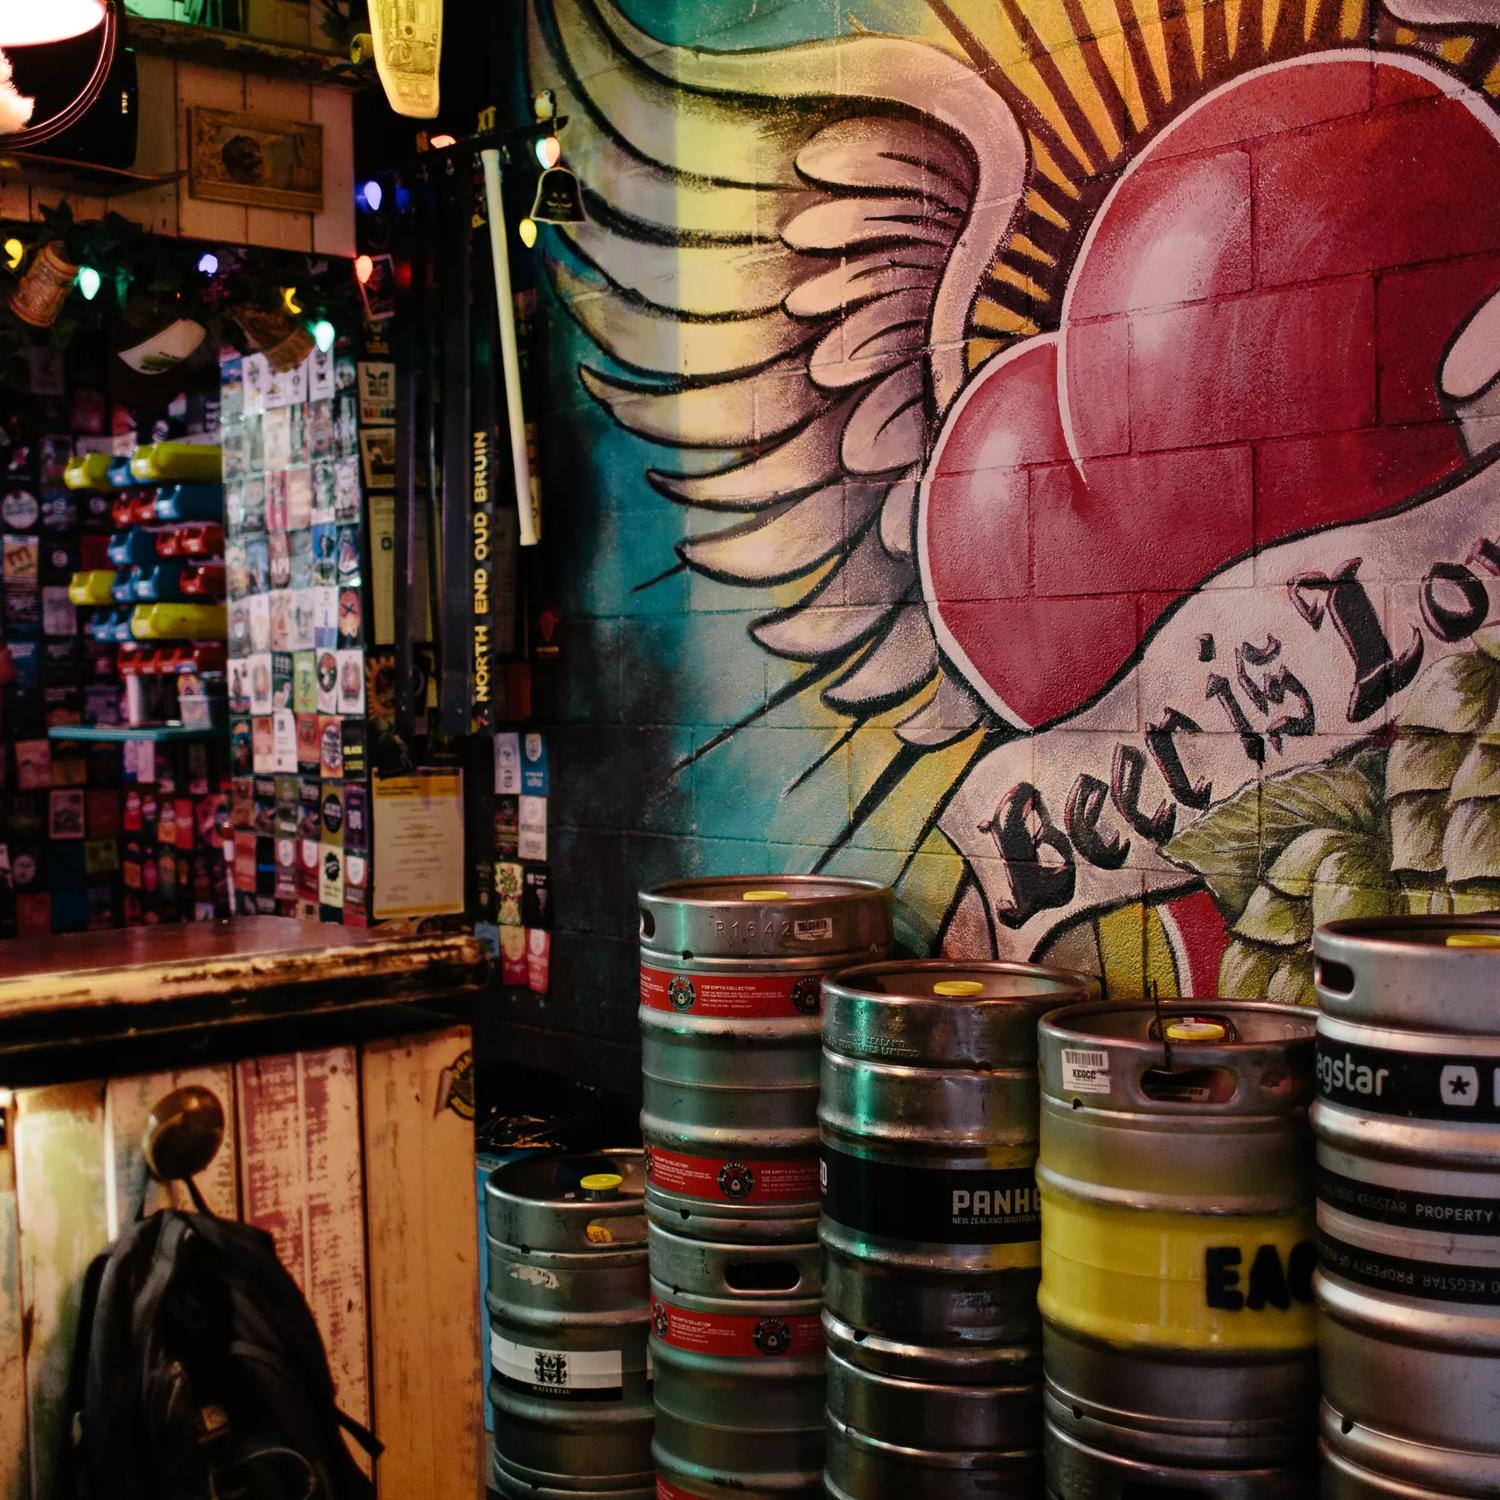 The interior of Golding’s bar. Kegs are stacked against the concrete brick wall, which has been painted with a heart with wings and a banner across it that says ‘beer is love’.